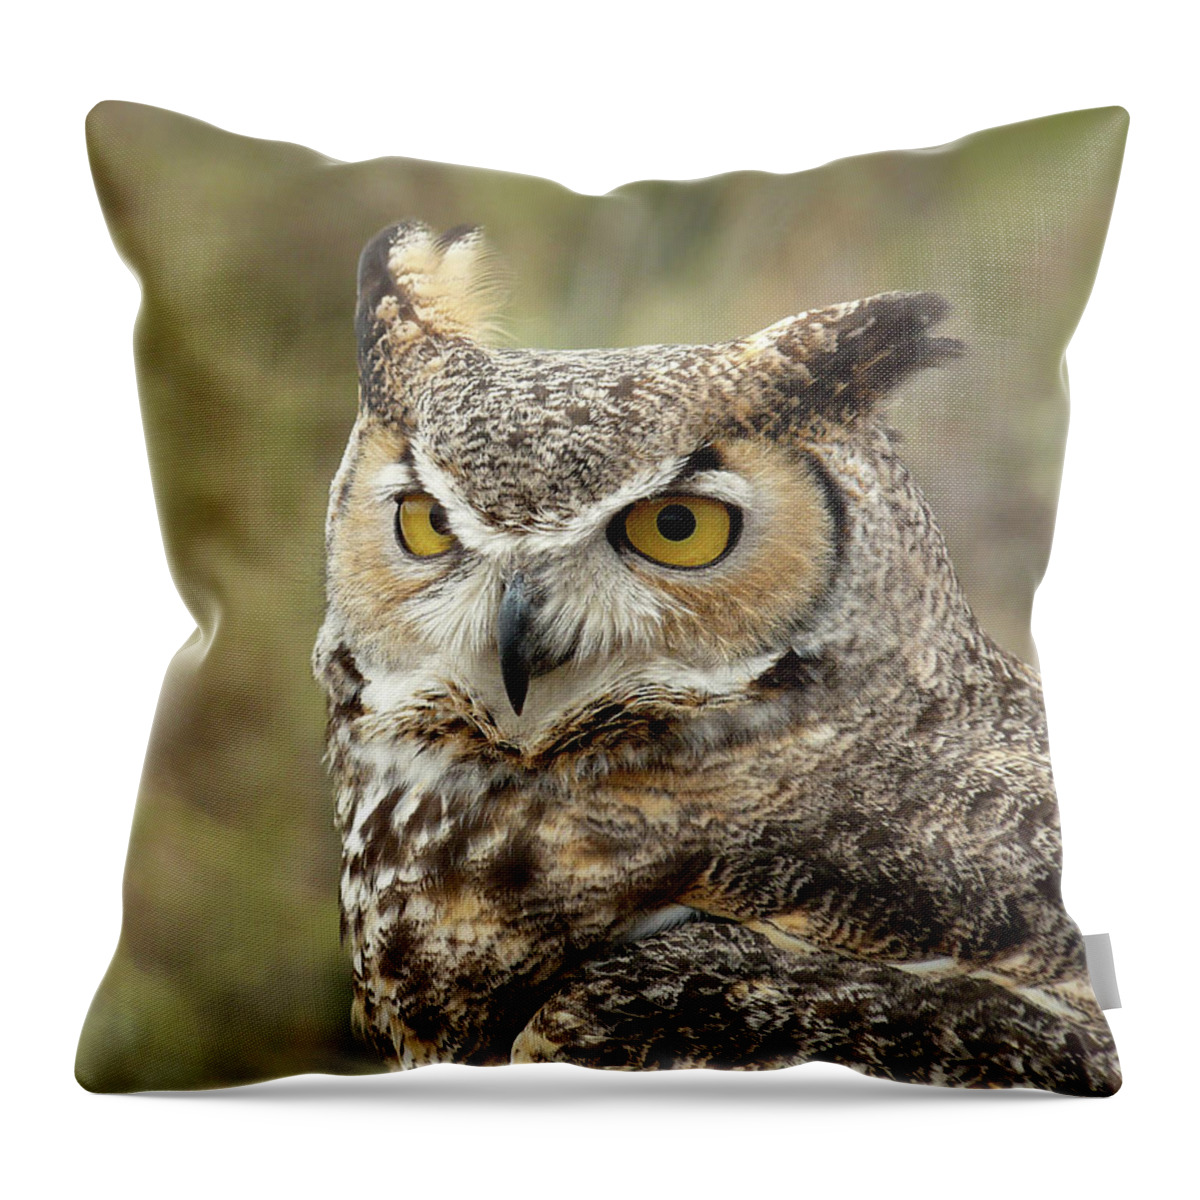 Owl Throw Pillow featuring the photograph The Owl by Lucinda Walter